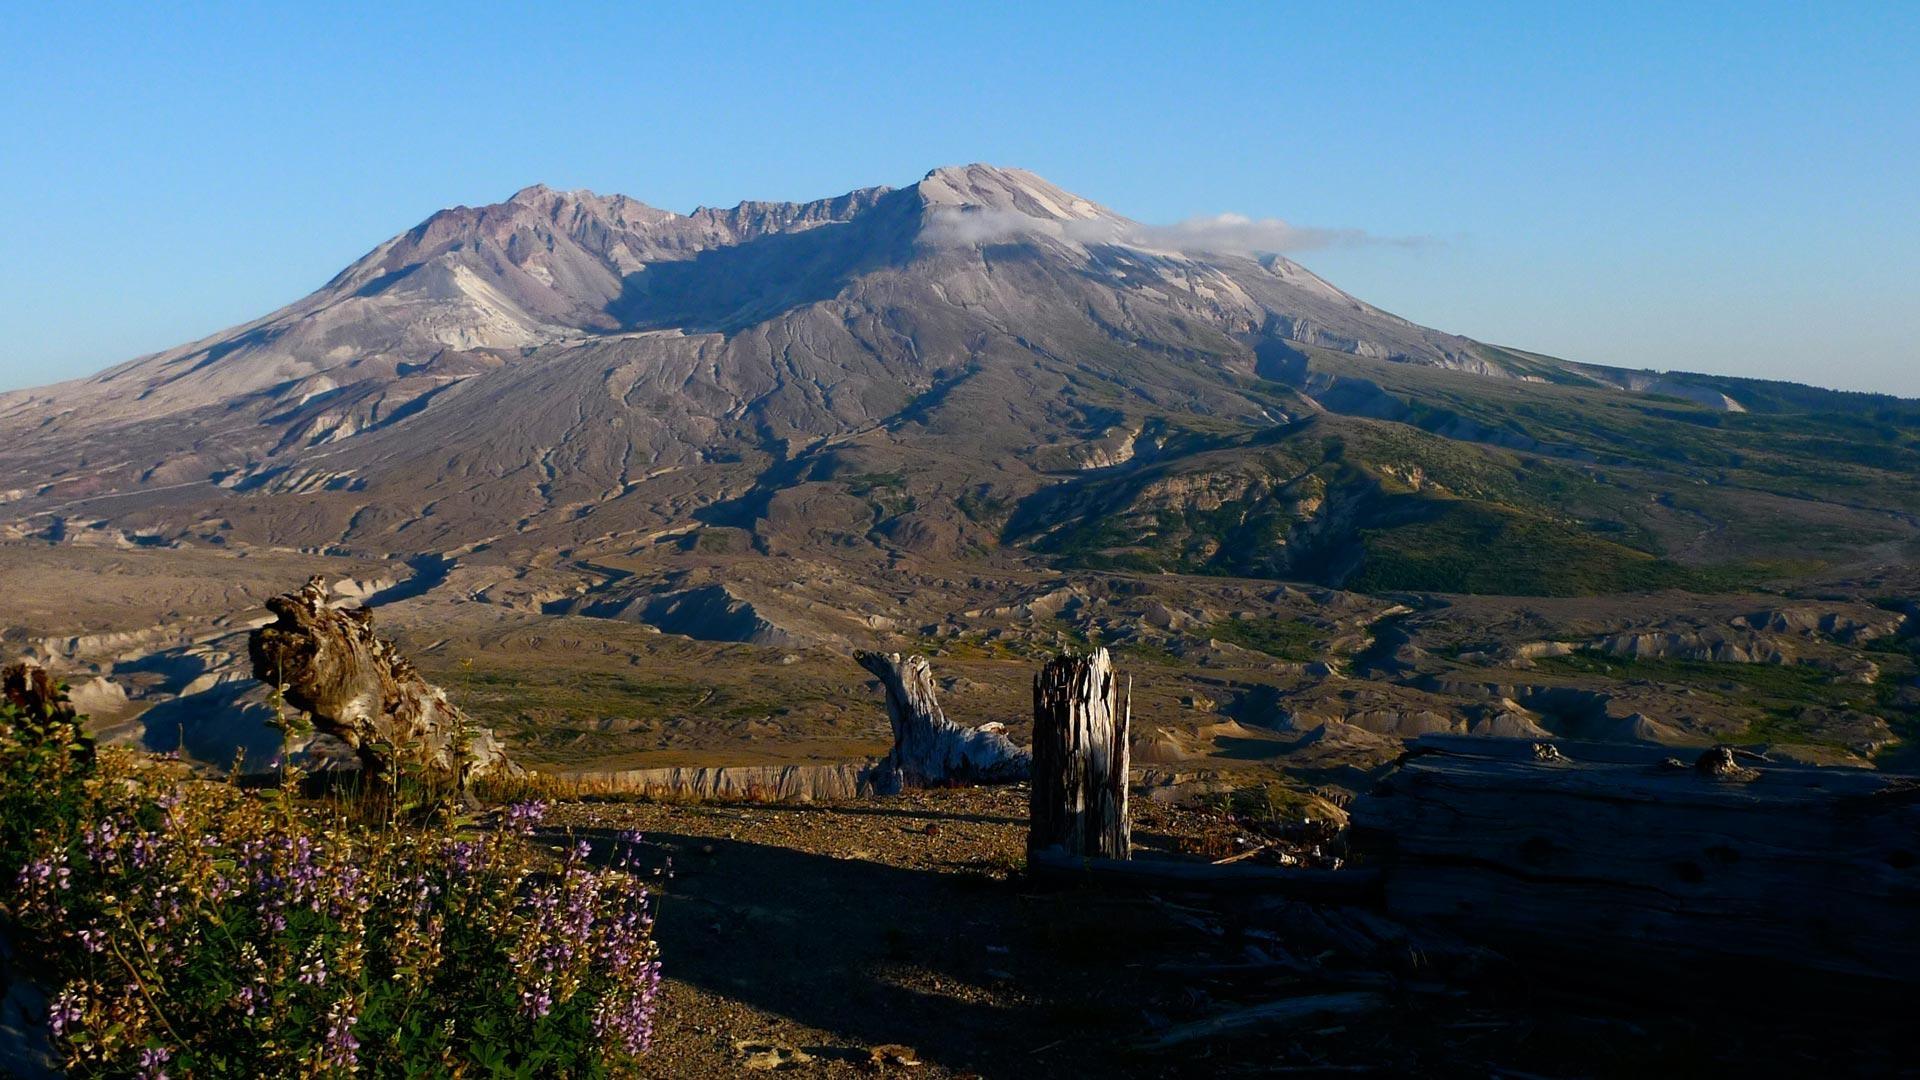 Mt St Helens: Back From the Dead